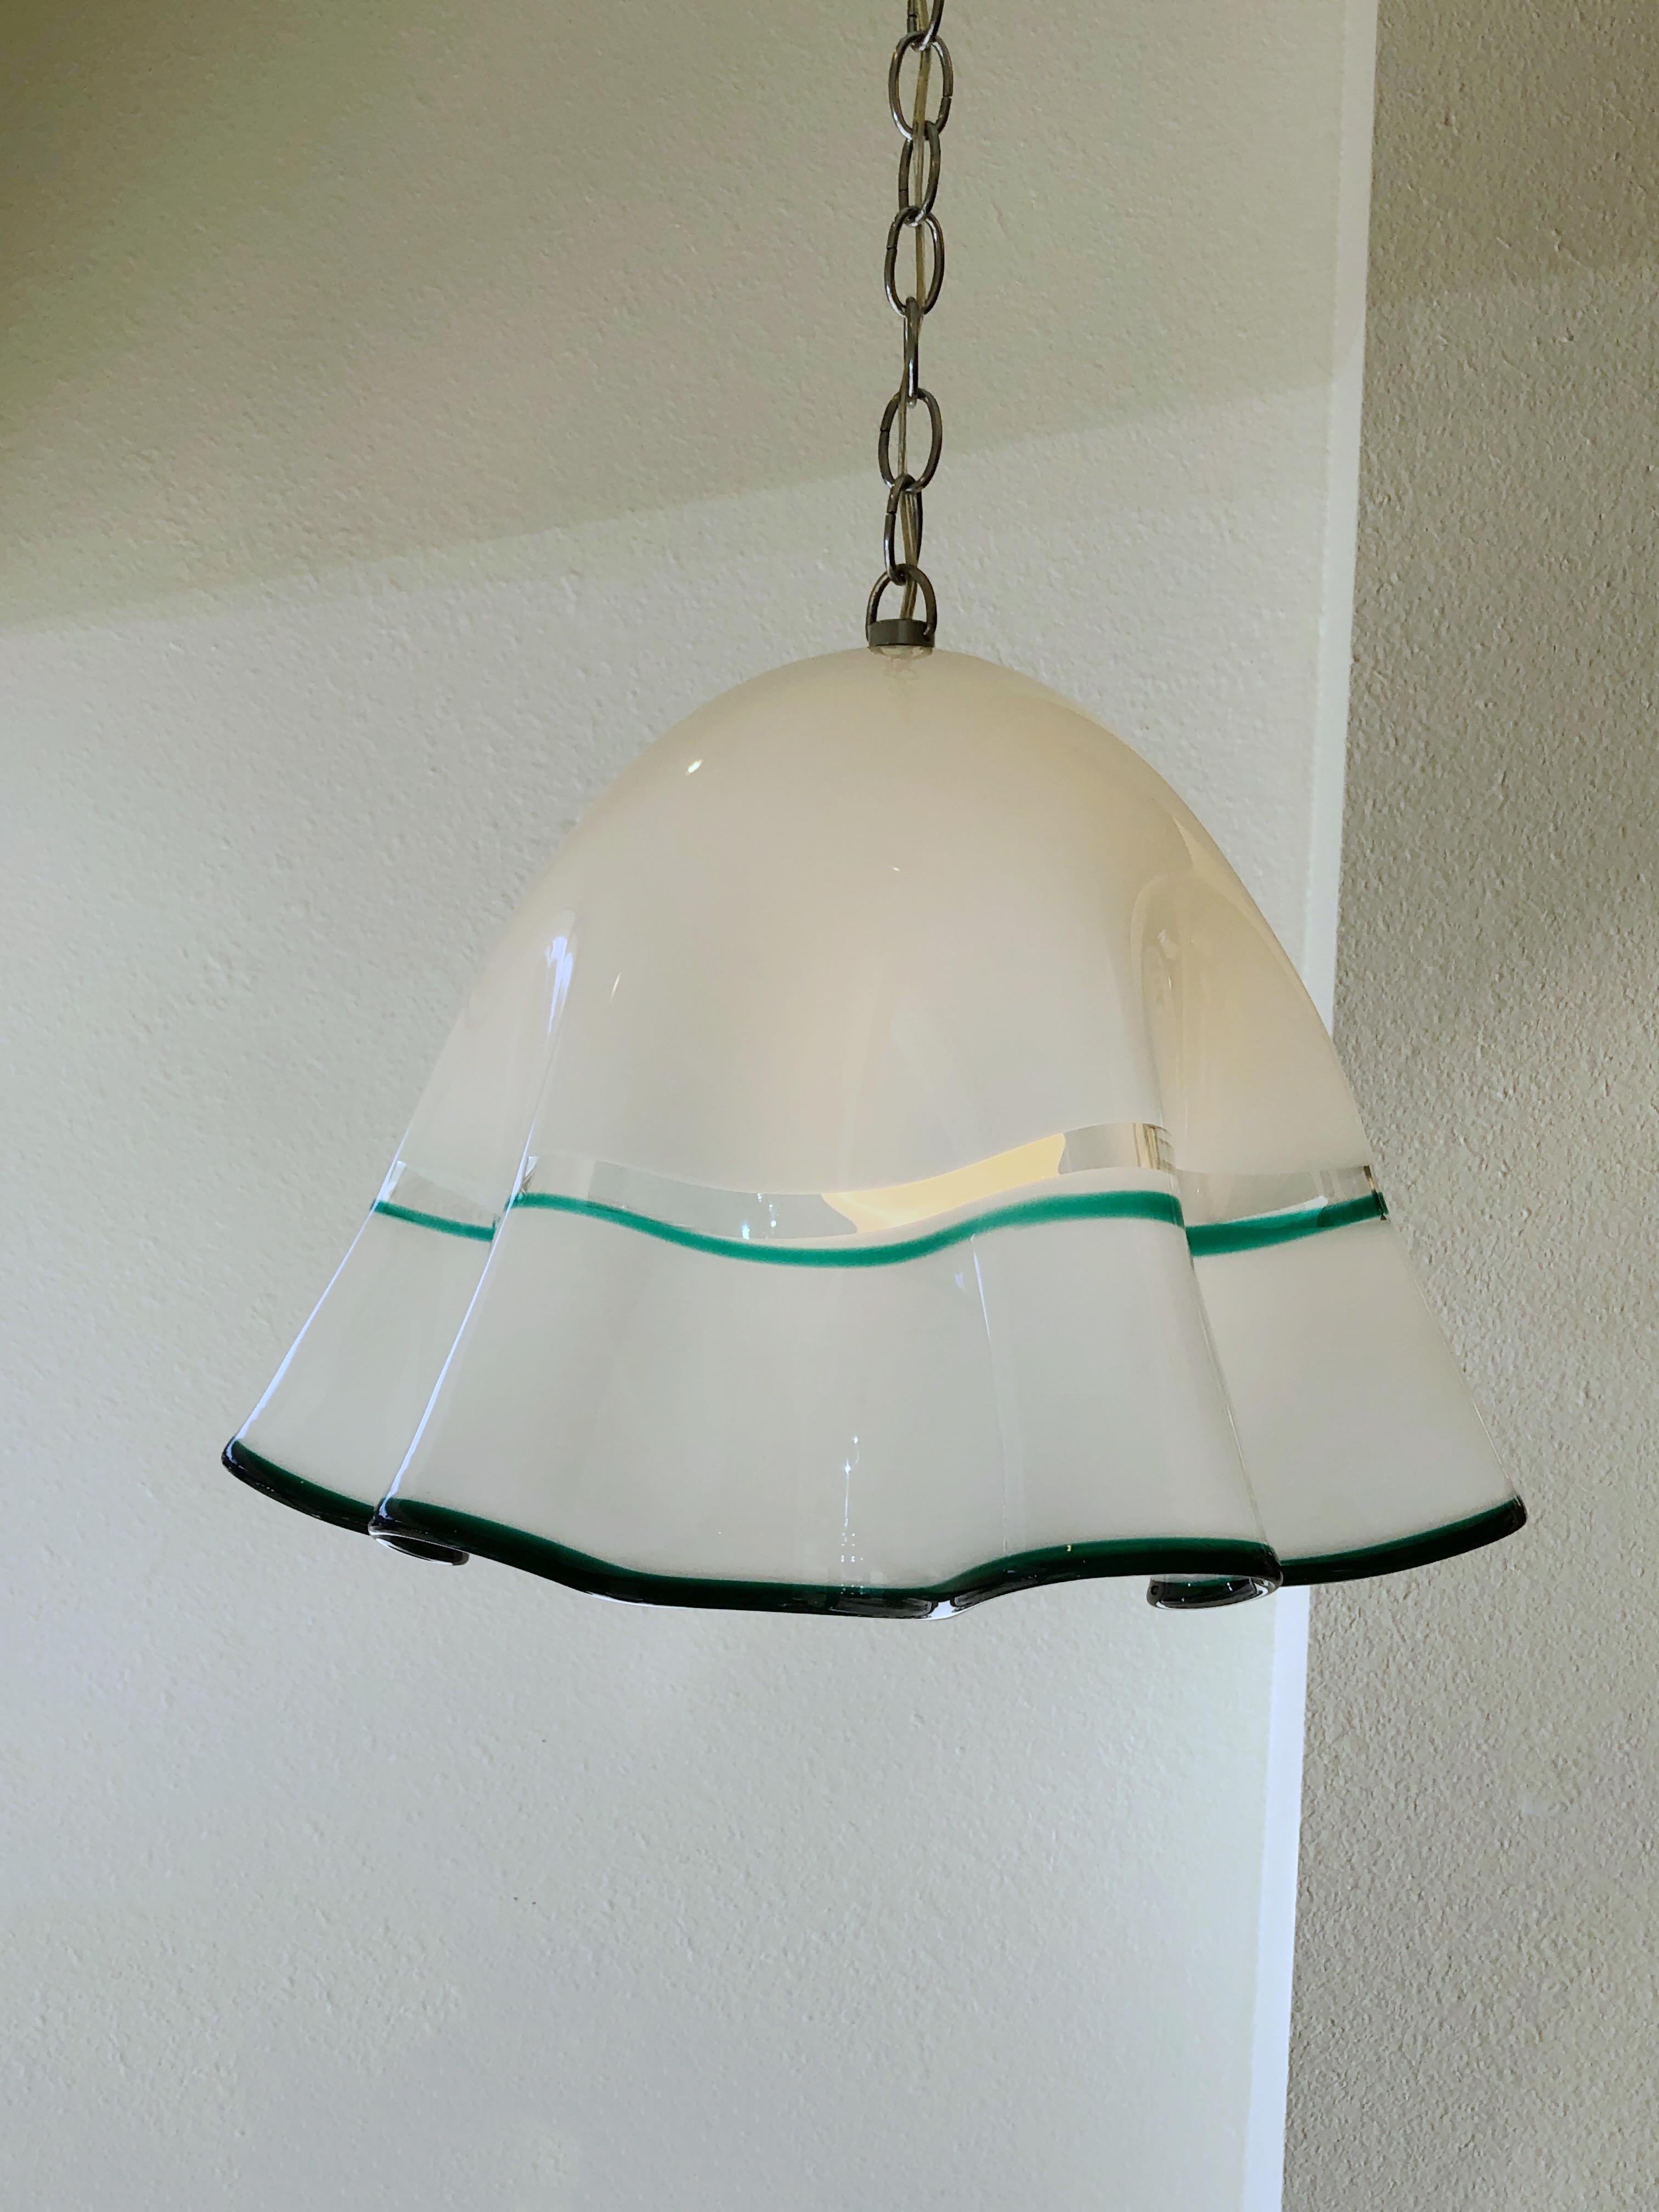 A 1960s Italian white with forest green outline Murano glass and chrome chain “Fazzoletto” by Mazzega. Newly rewired. We can add more chain if need.
Dimensions: 19” diameter, 15” high, 48” high with chain.